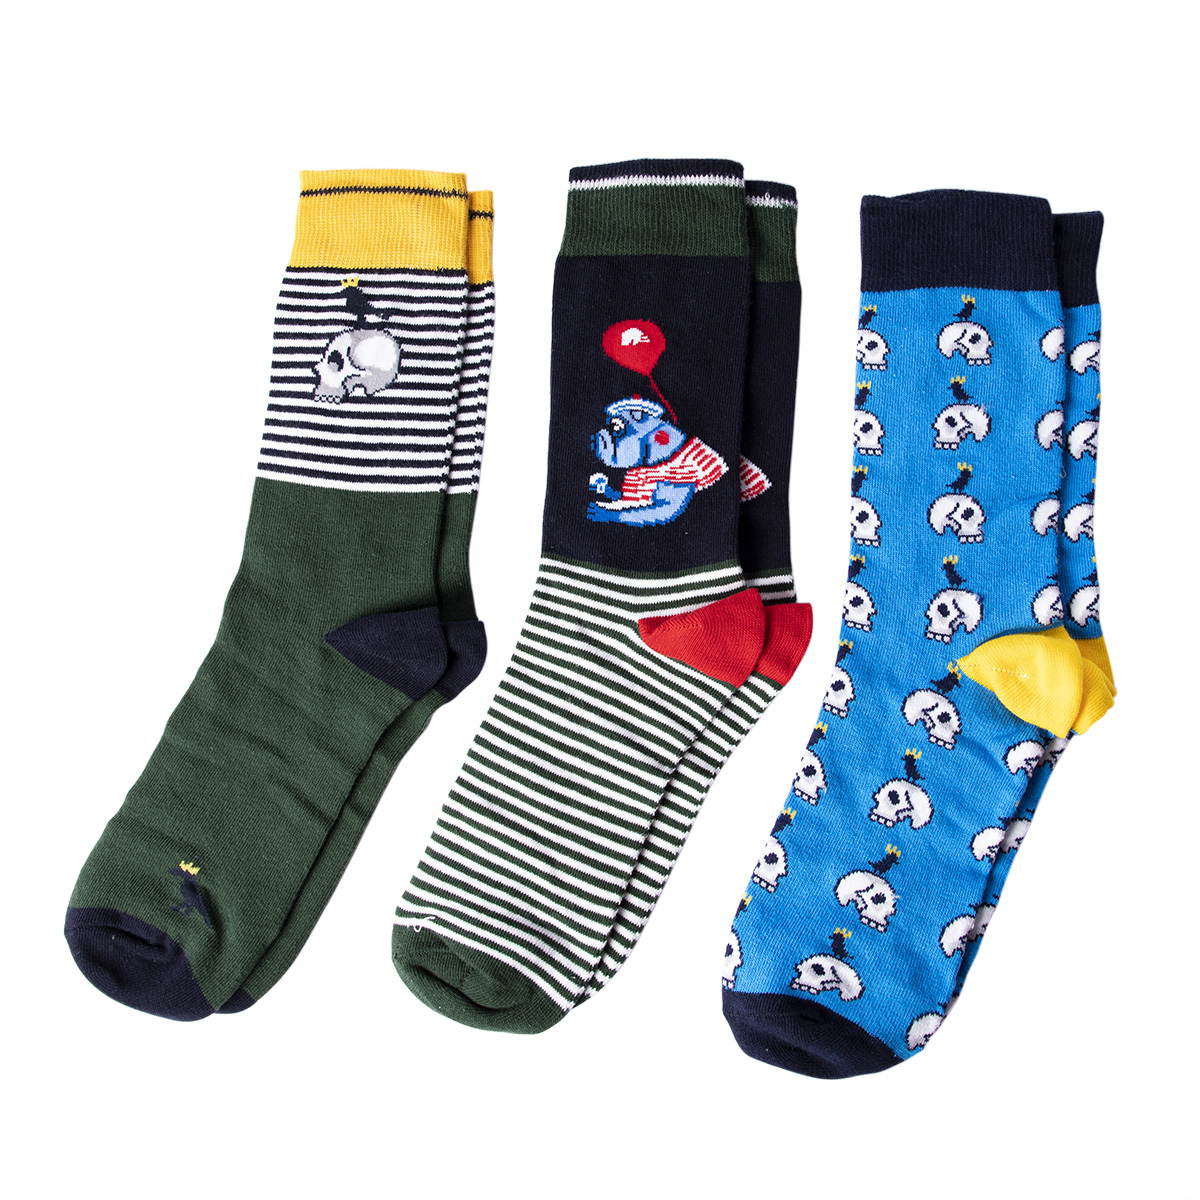 Biggdesign Mens Cotton 3-Pack Patterned Socks,  Ankle High Dress and Casual Socks For Men, Cool Socks, Animal Themed Colorful Design, 3 Different Patterns